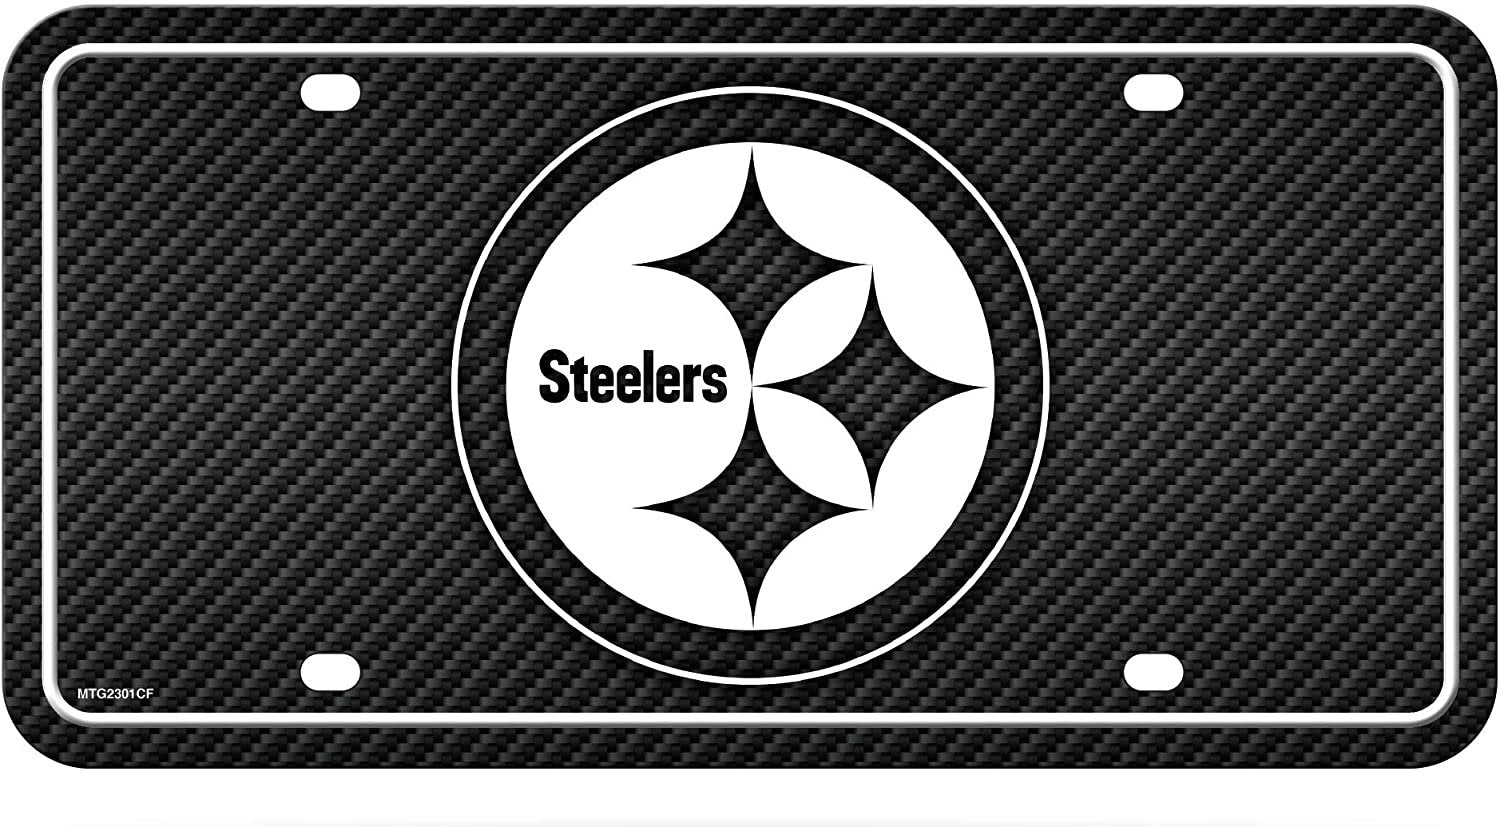 Pittsburgh Steelers Metal Auto Tag License Plate, Carbon Fiber Design, 6x12 Inch